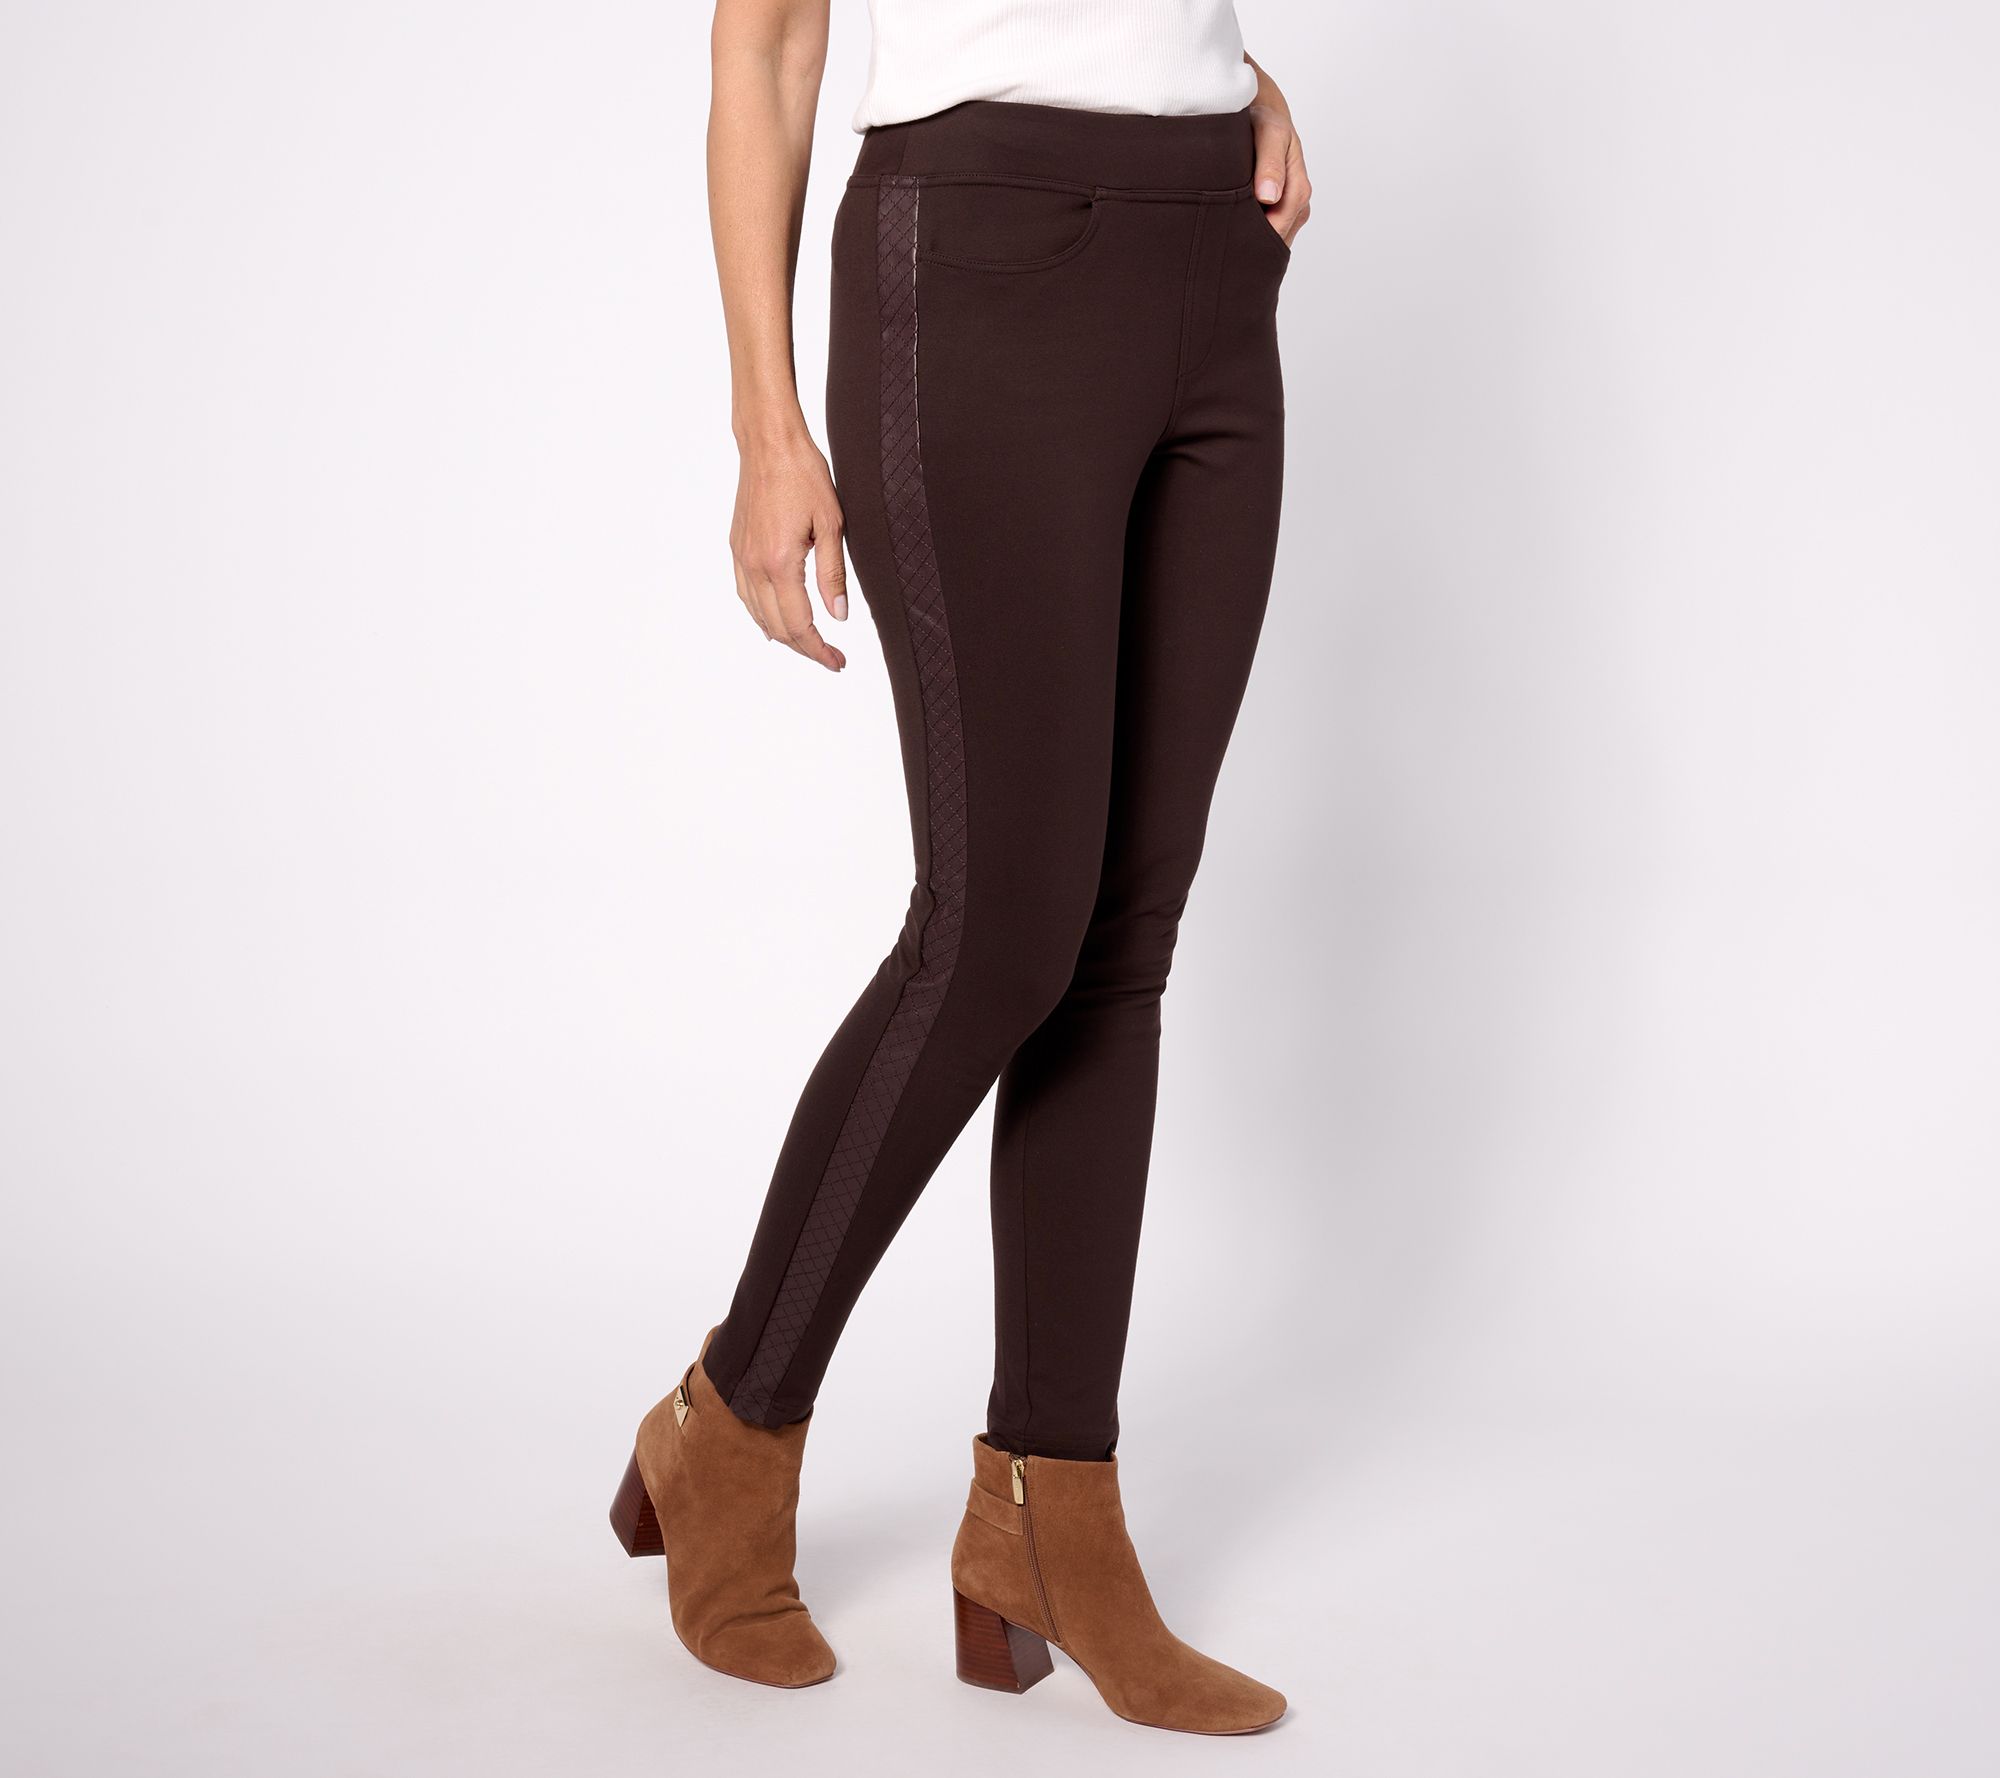 Topshop Petite faux leather skinny fit pants in chocolate